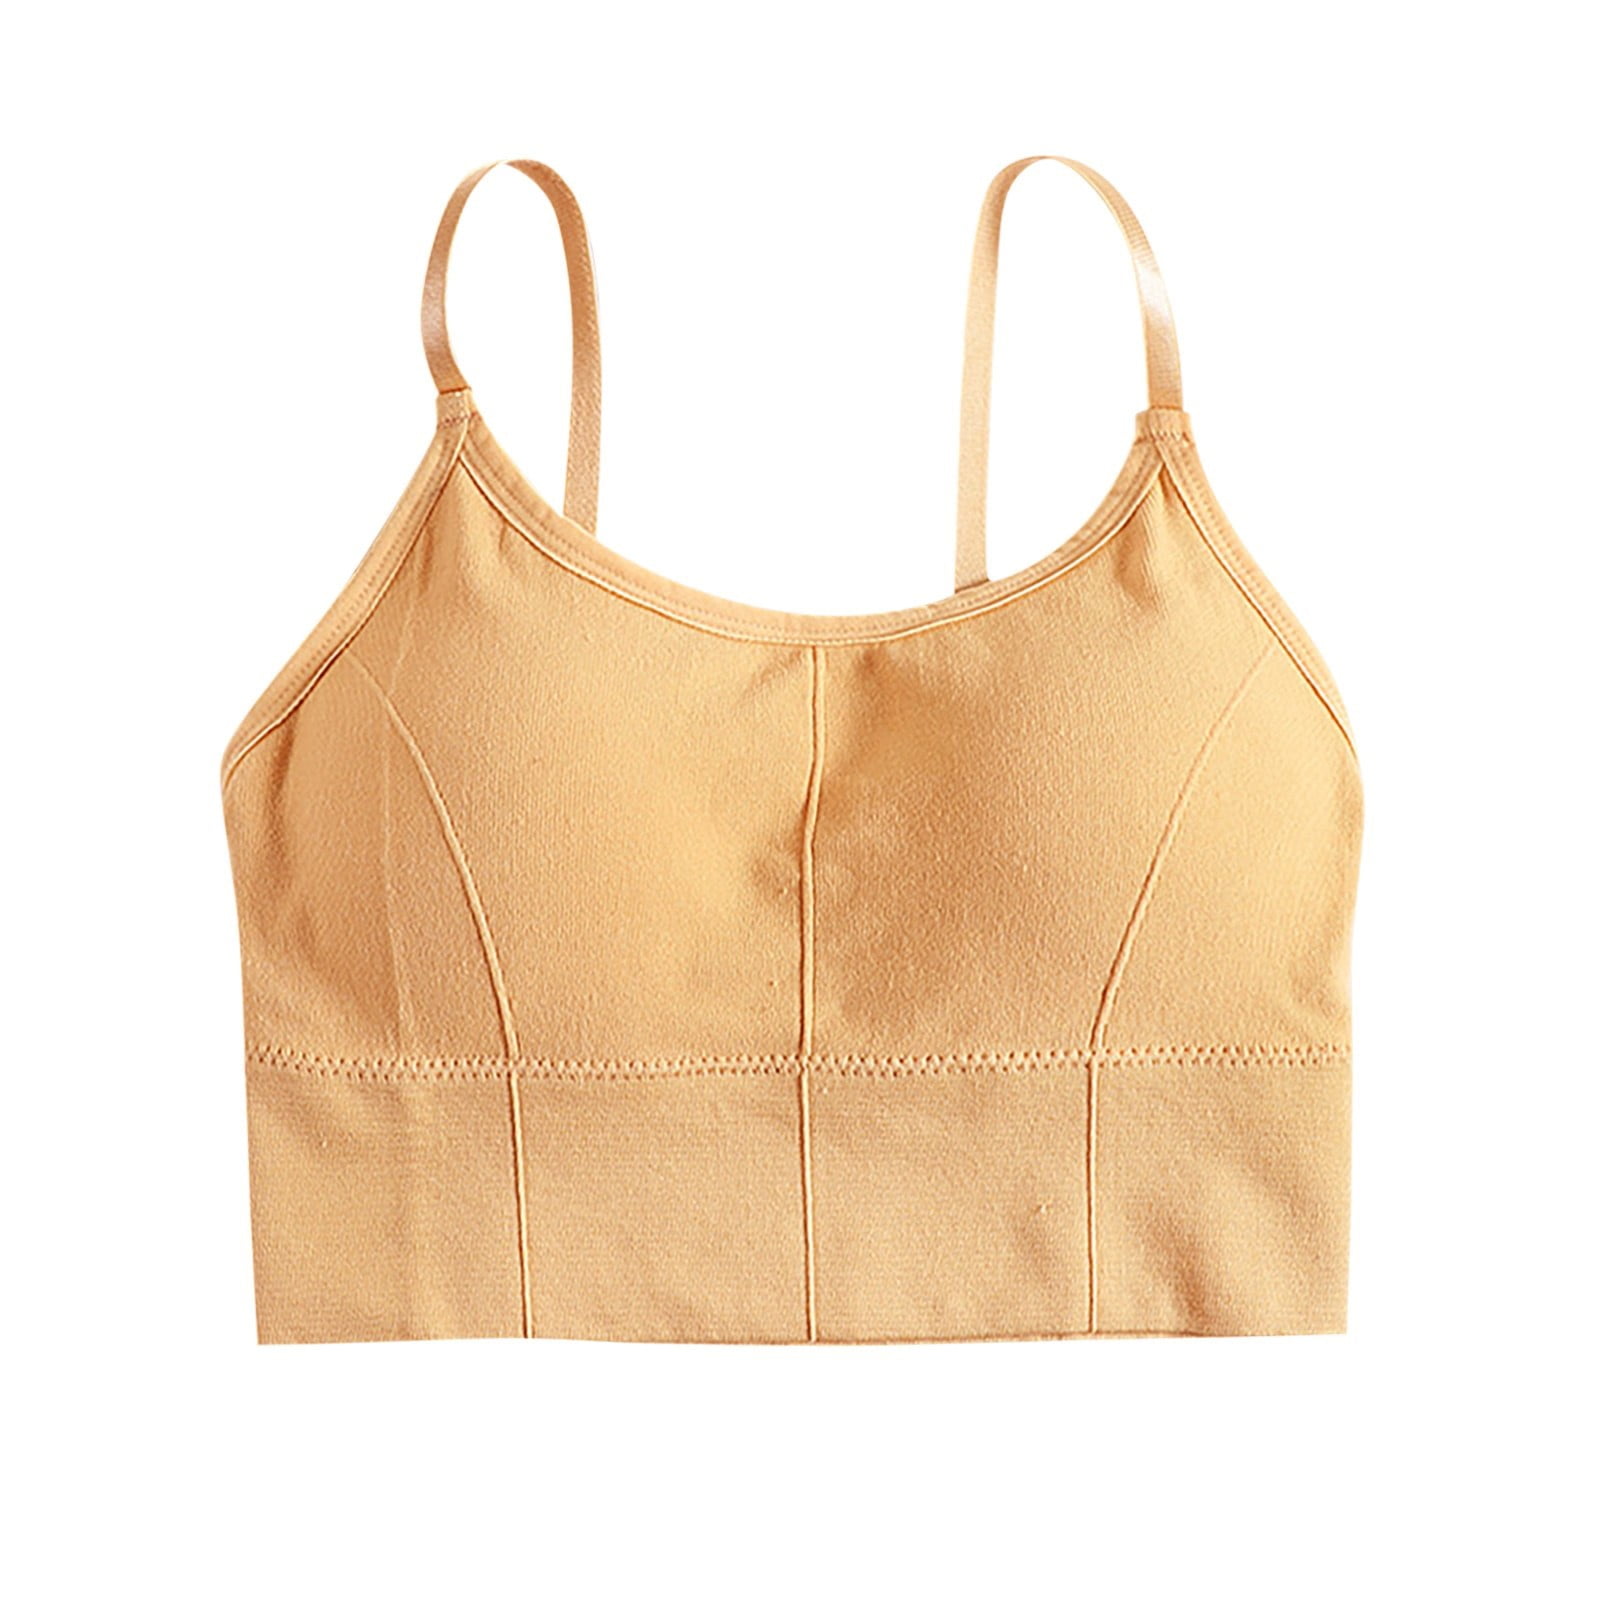 EHQJNJ Push up Bras for Women Tank with Built in Bra Womens Tank Tops Strap Stretch  Cotton Camisole with Built in Padded Shelf Bra Small Color A Cotton Bras  for Women No